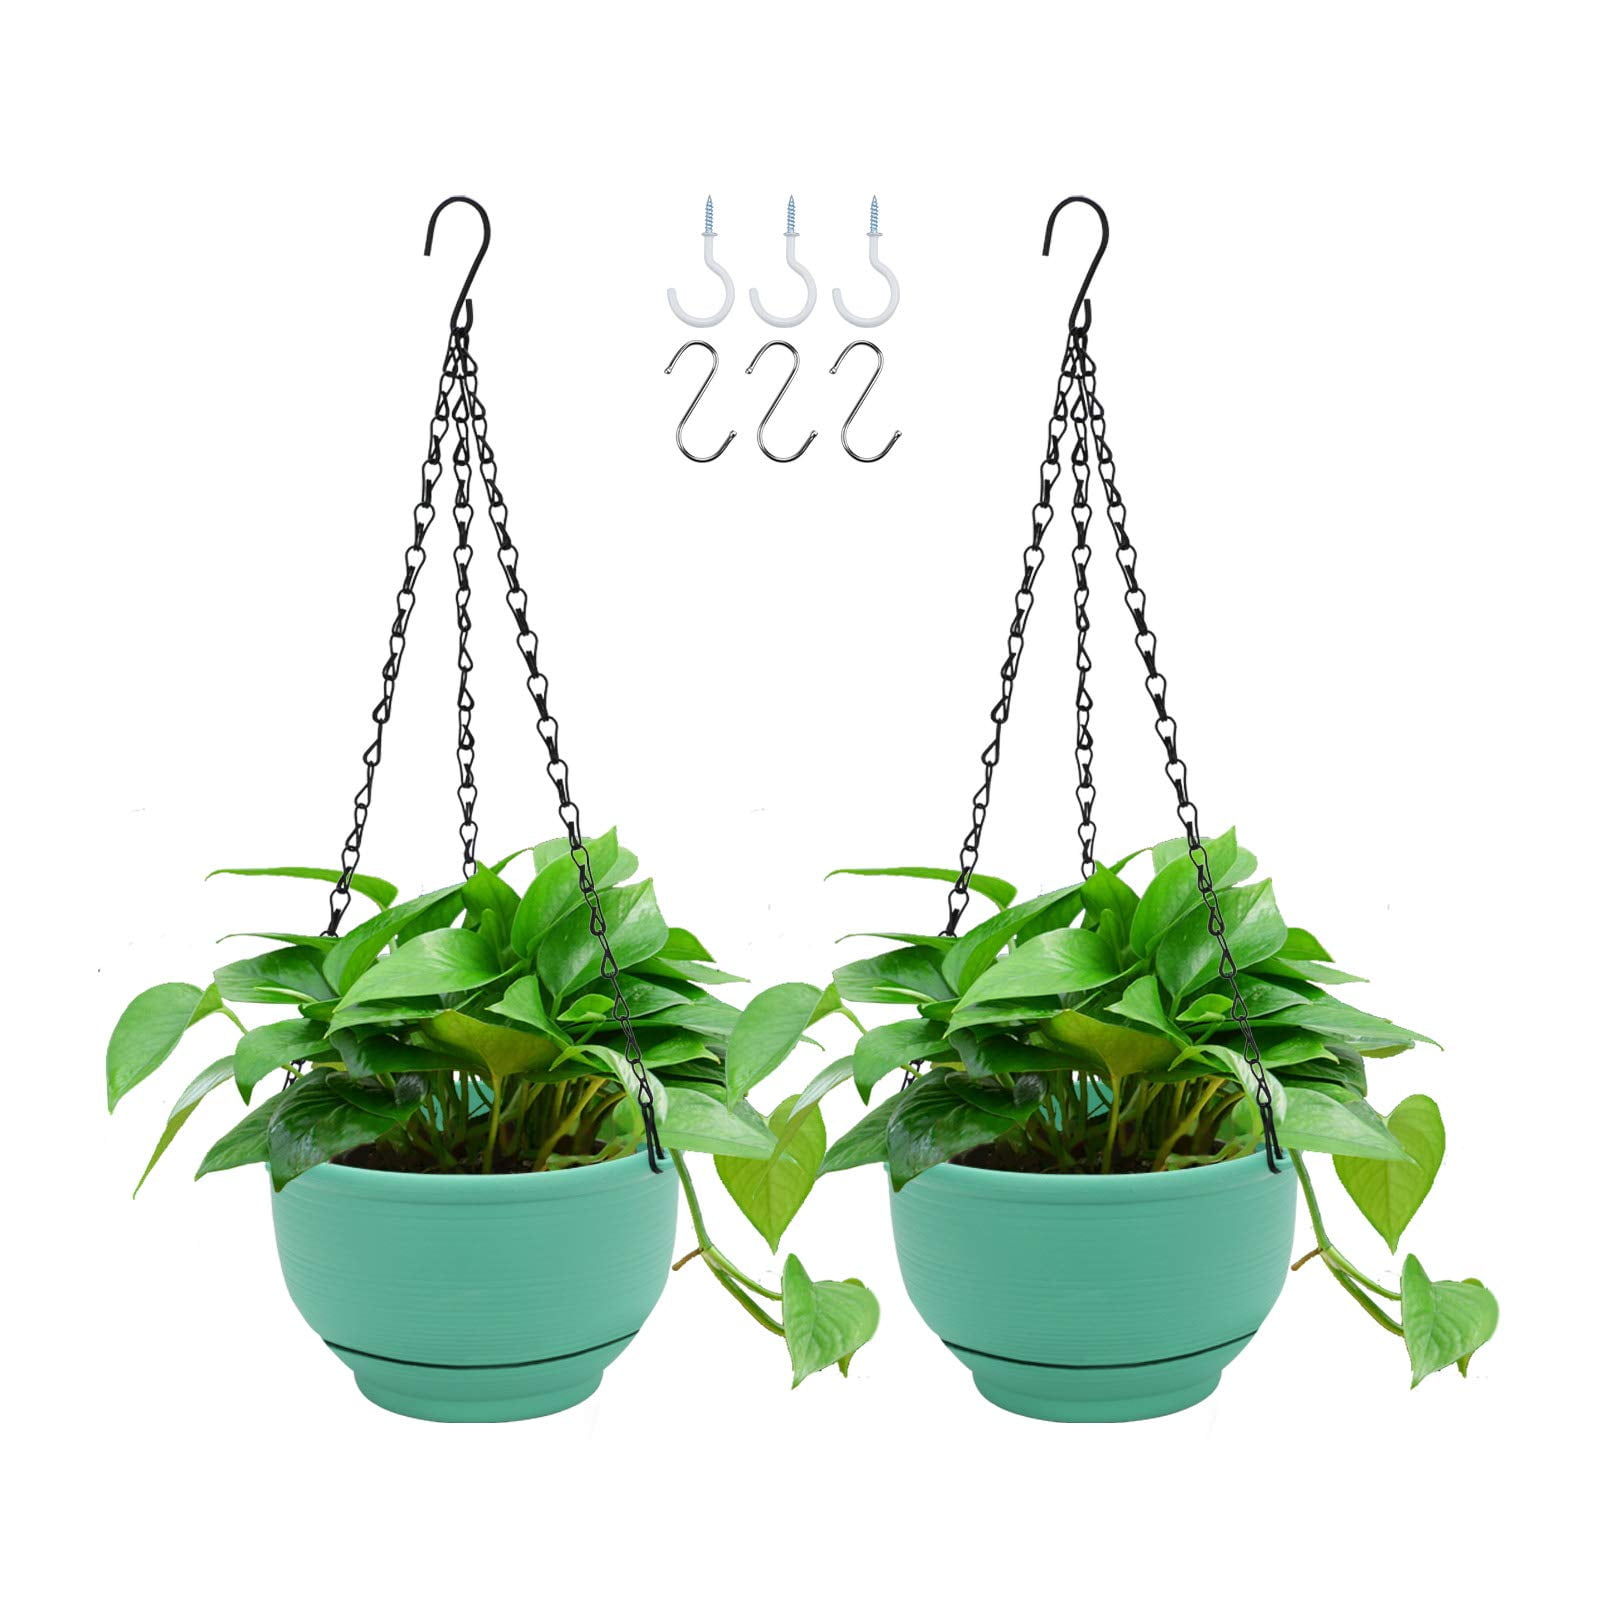 3D Wall Hanging Flower Pot for Dry Flower Greenery Plant Basket Crafts Gift 